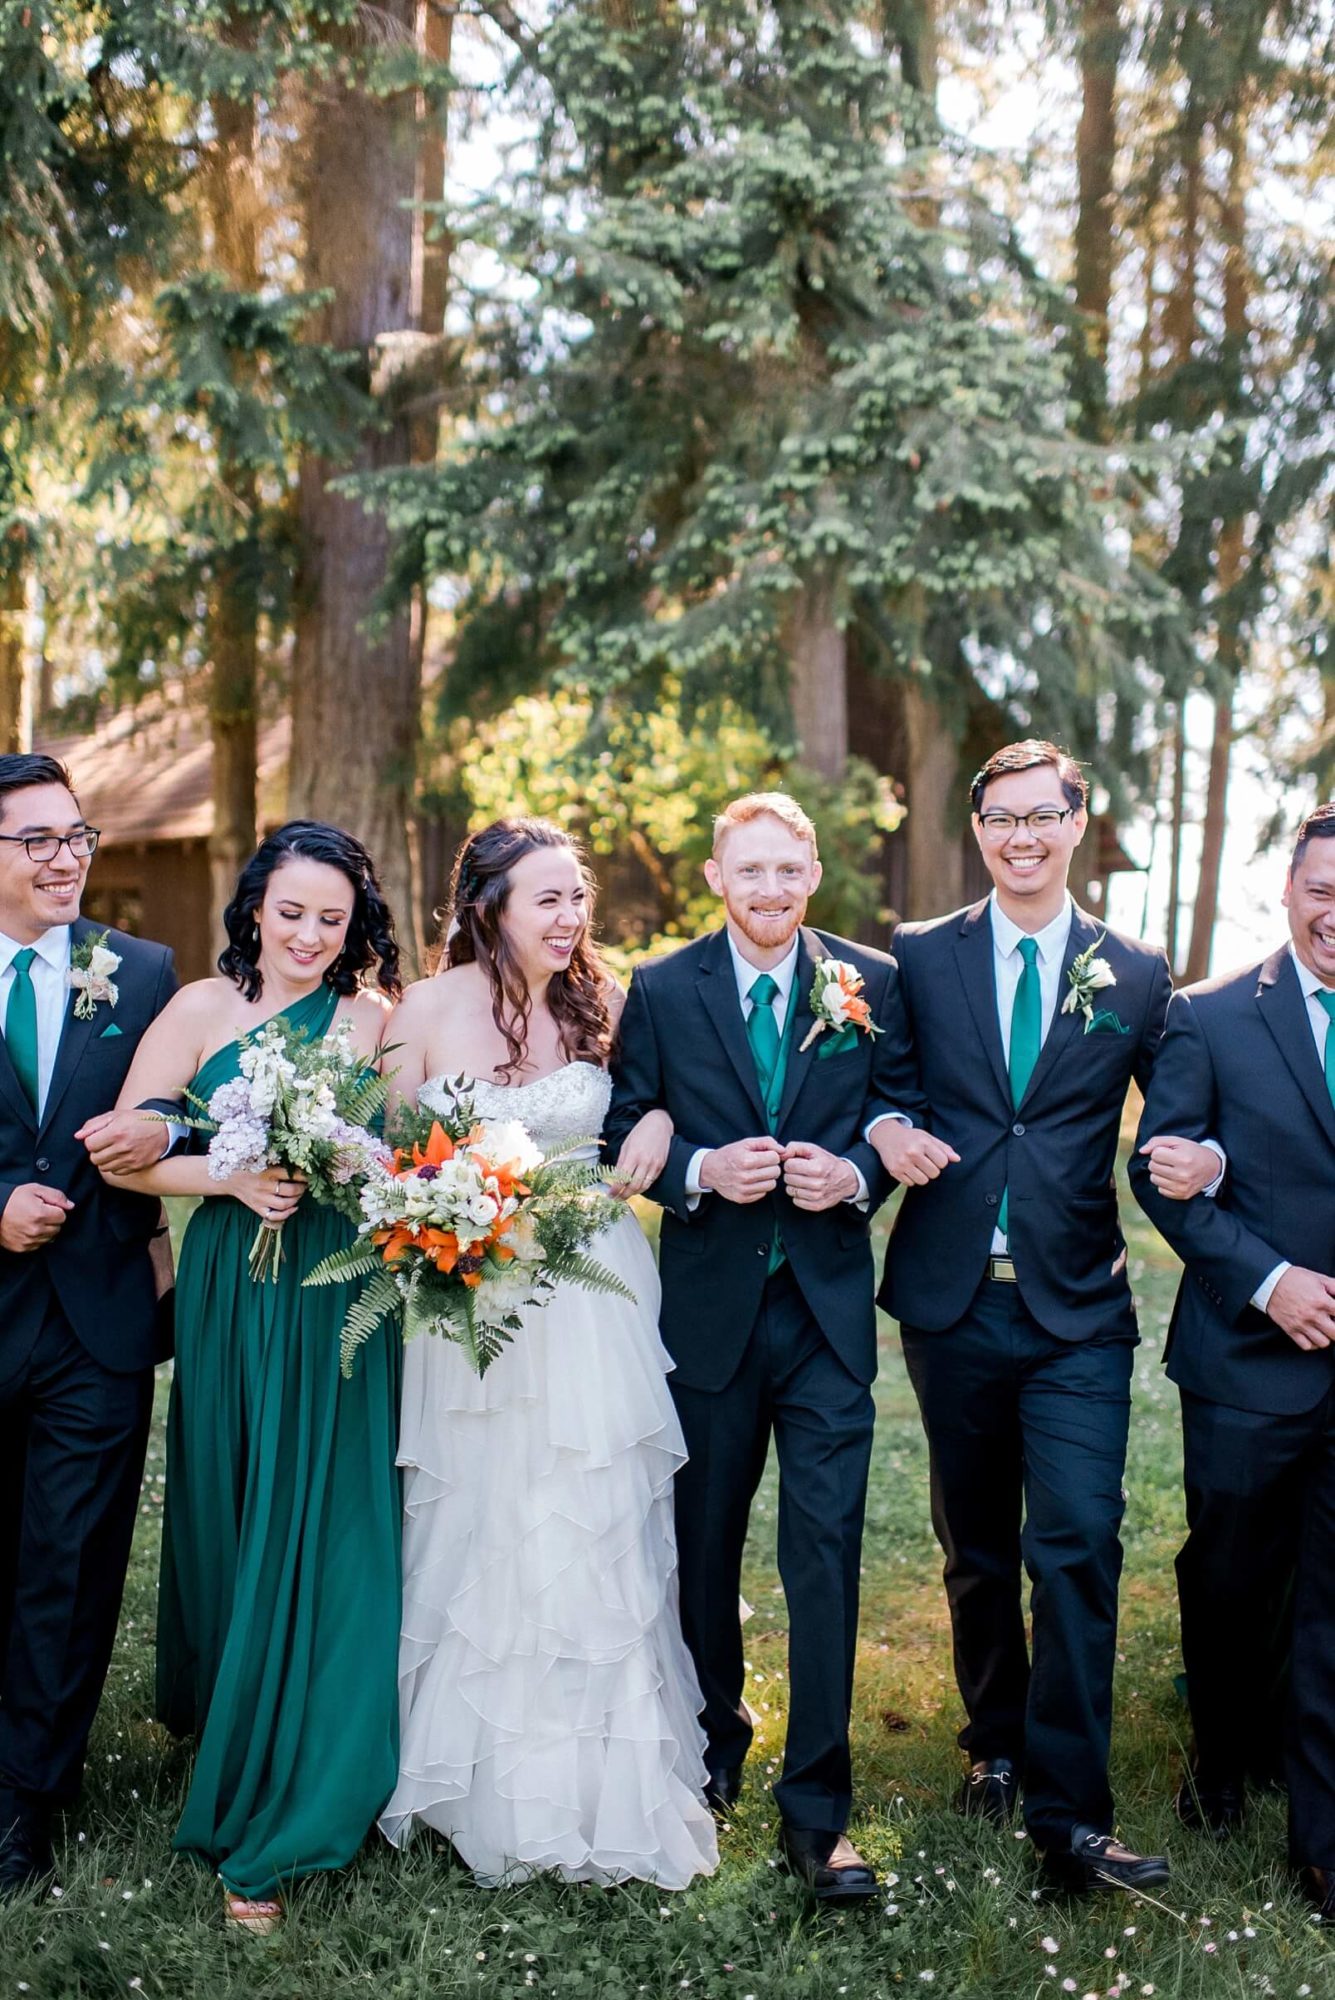 Kitsap County wedding in the forest